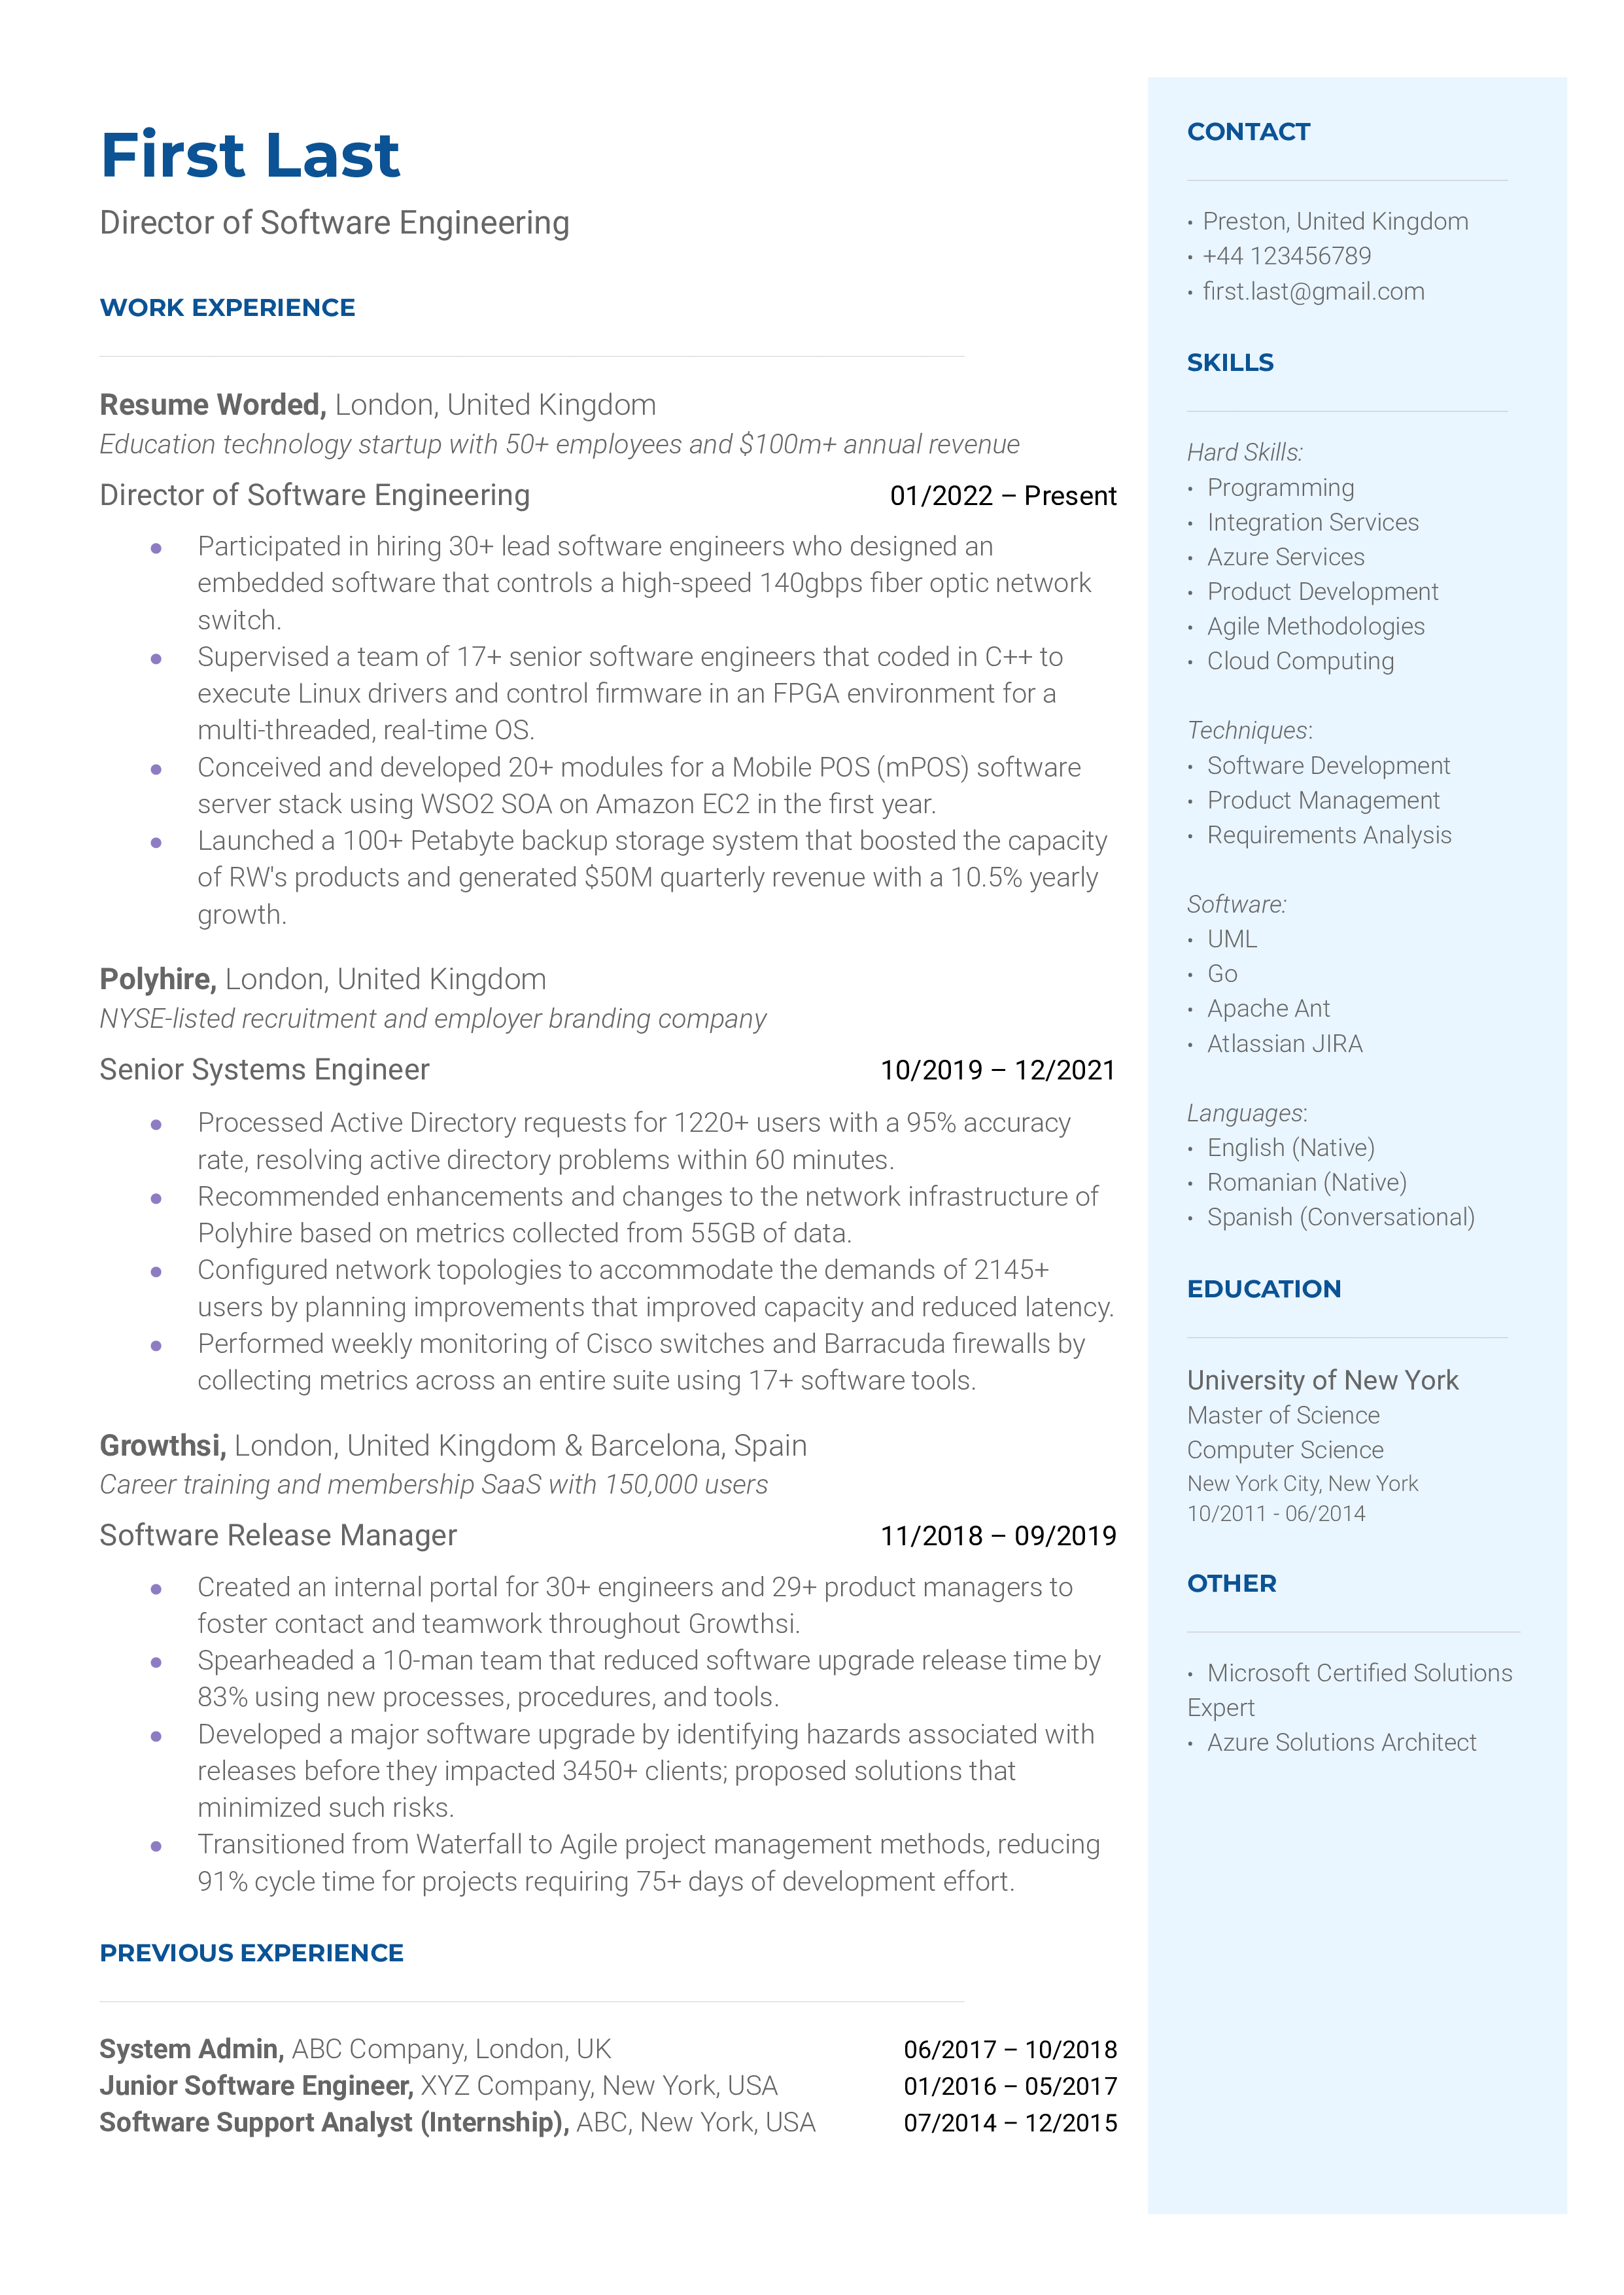 A director of software engineering resume template combining strong action verbs with accomplishments.